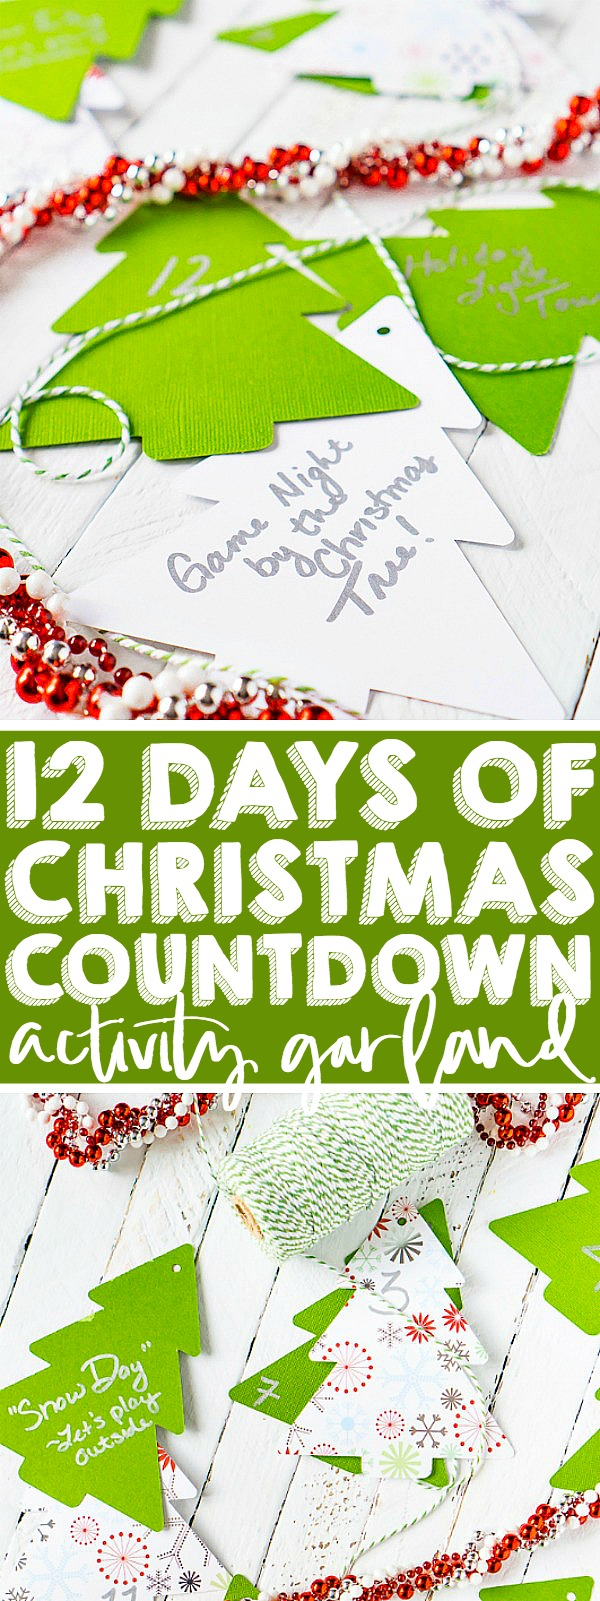 Celebrate the holiday season with this 12 Days of Christmas Countdown! Easily craft your countdown garland toward Christmas Family Activities or celebrate the season with easy Christmas date night ideas. Or go crazy and do both! | THE LOVE NERDS #christmasgarland #christmasactivities #countdowngarland #adventgarland